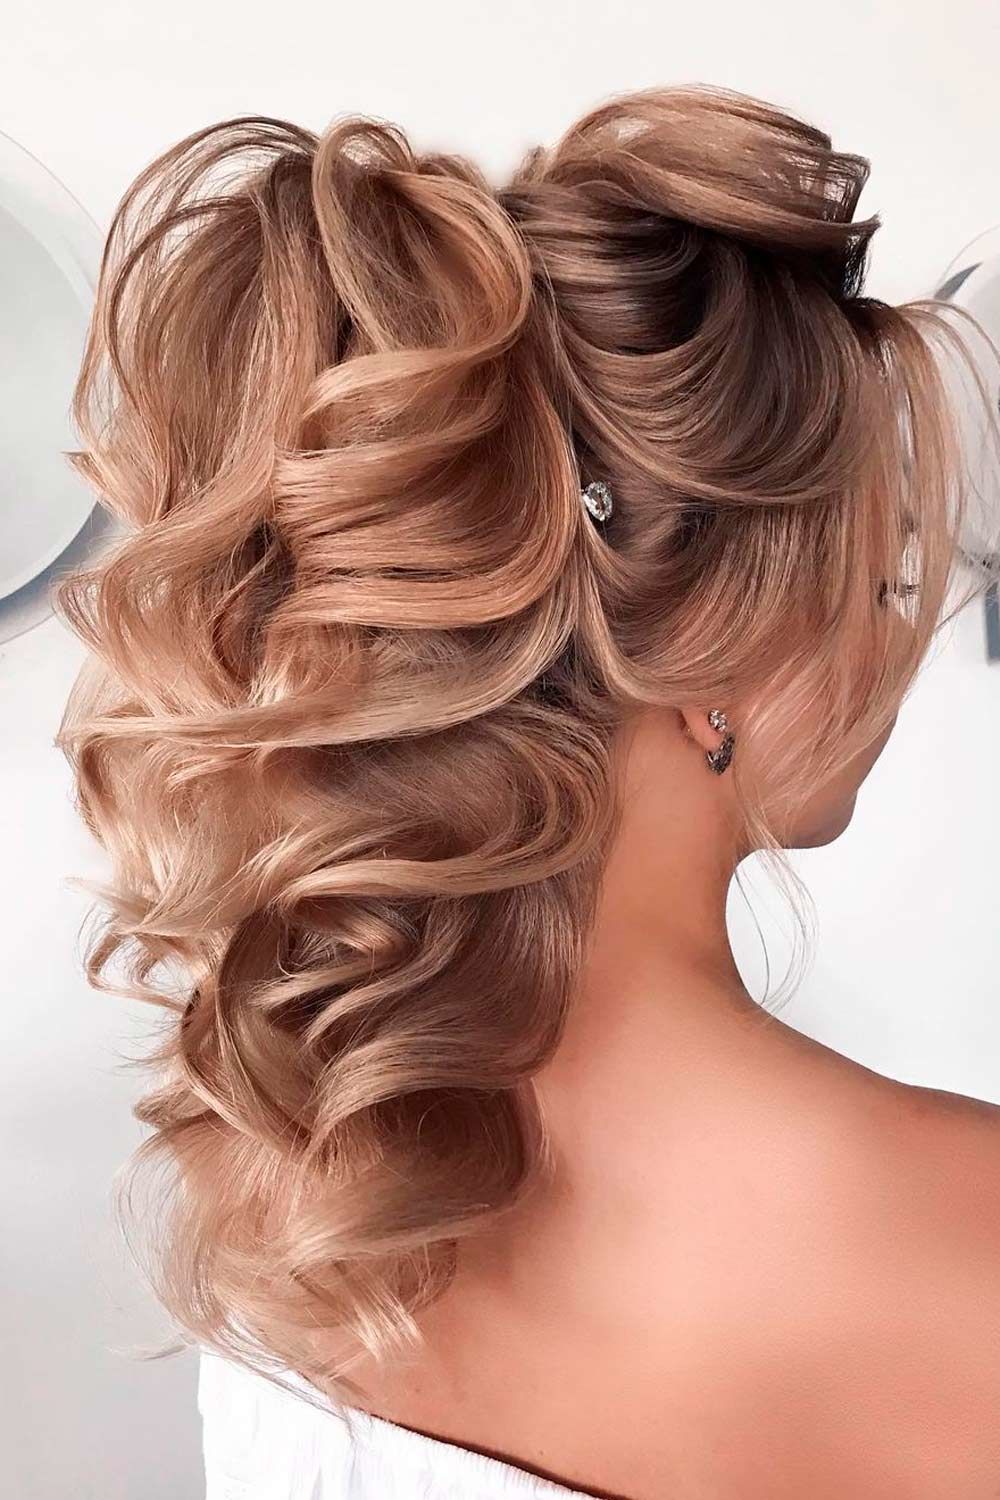 35 Spectacular Holiday Hair Ideas For Special Holiday Time